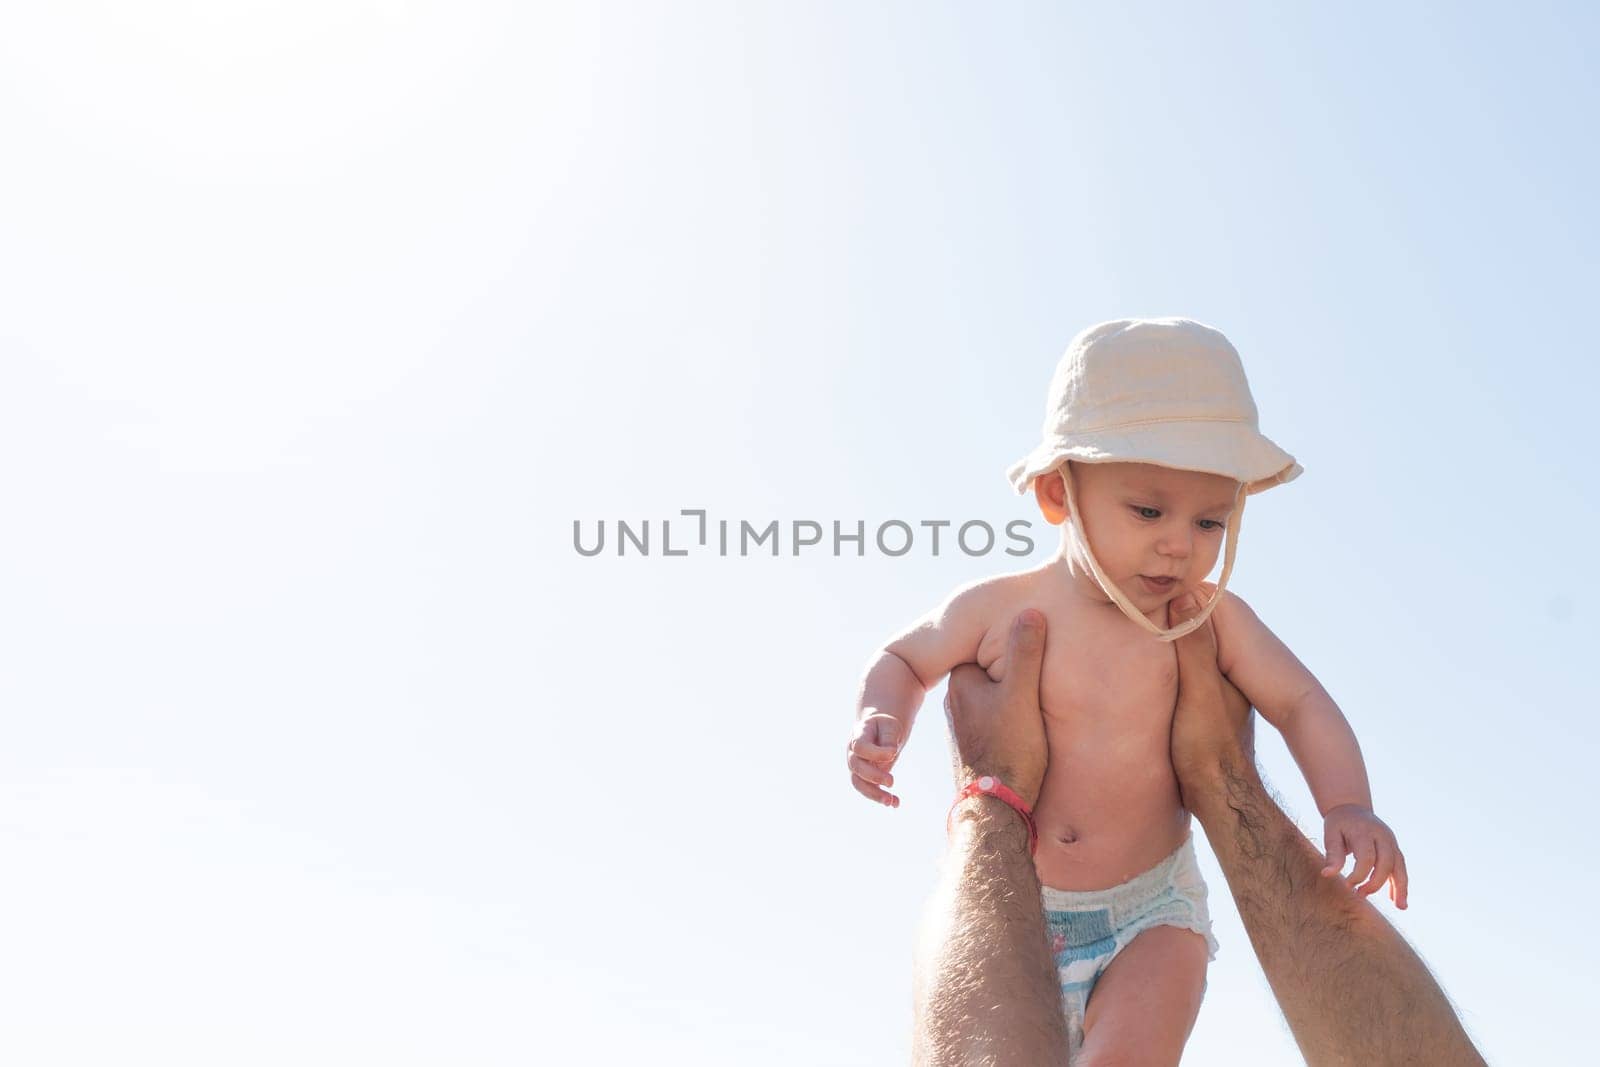 A magical moment under the sun as a father lifts his child, their bond shining as bright as the sunlight. Concept of carefree days and guiding love